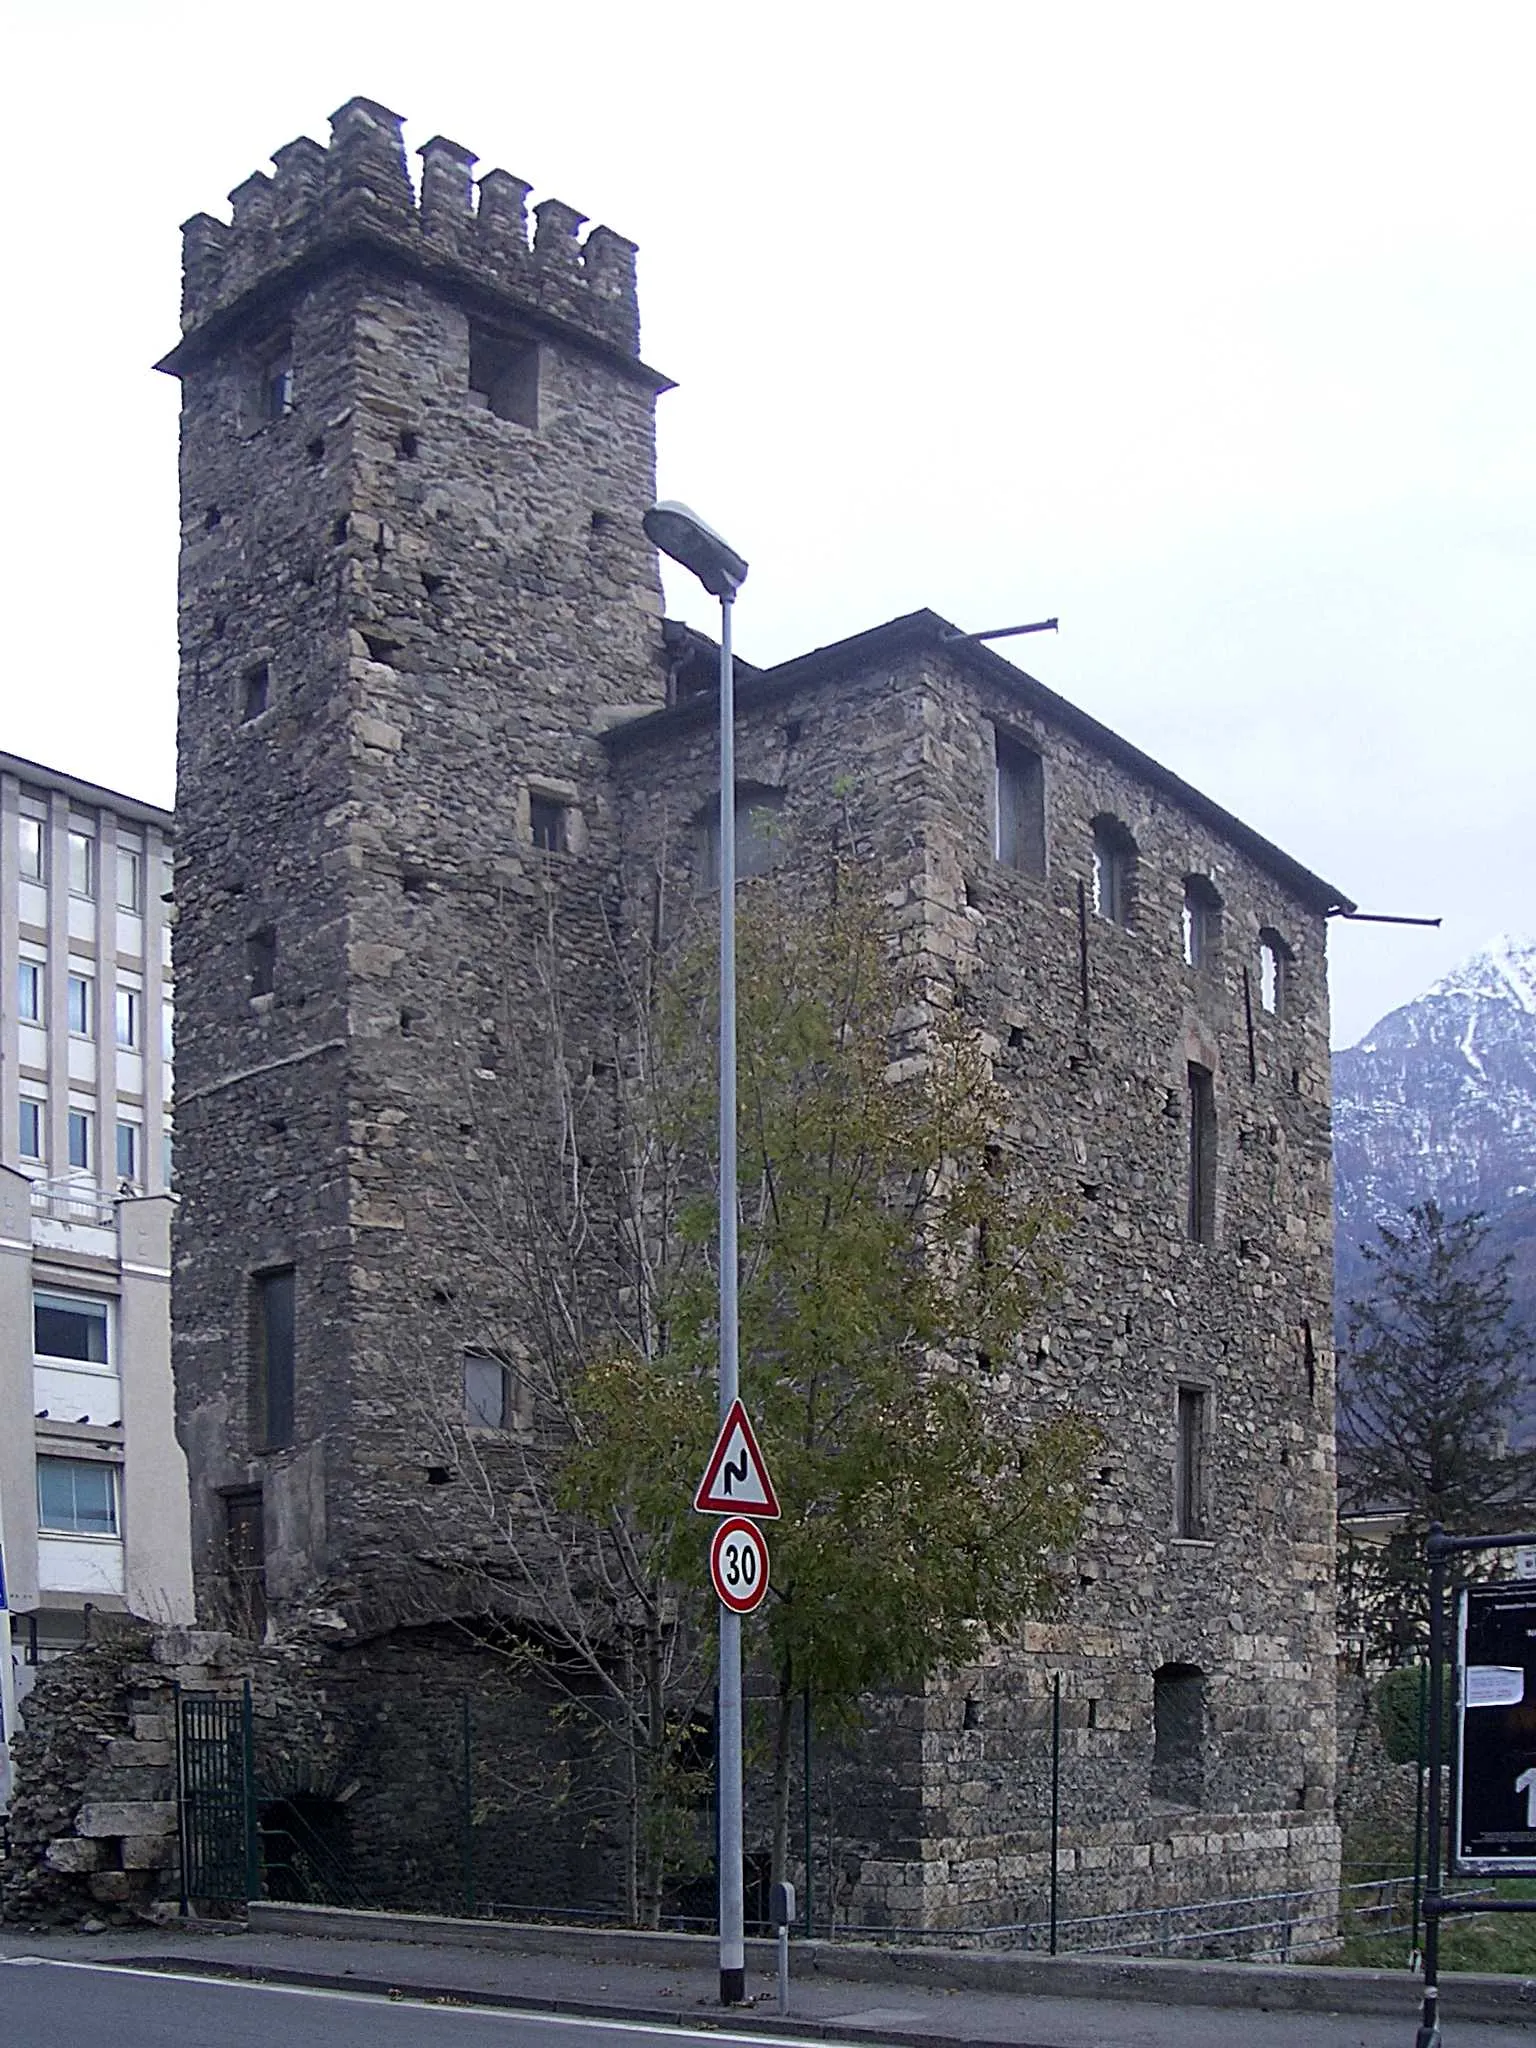 Photo showing: The medieval tower called "the leper's tower"